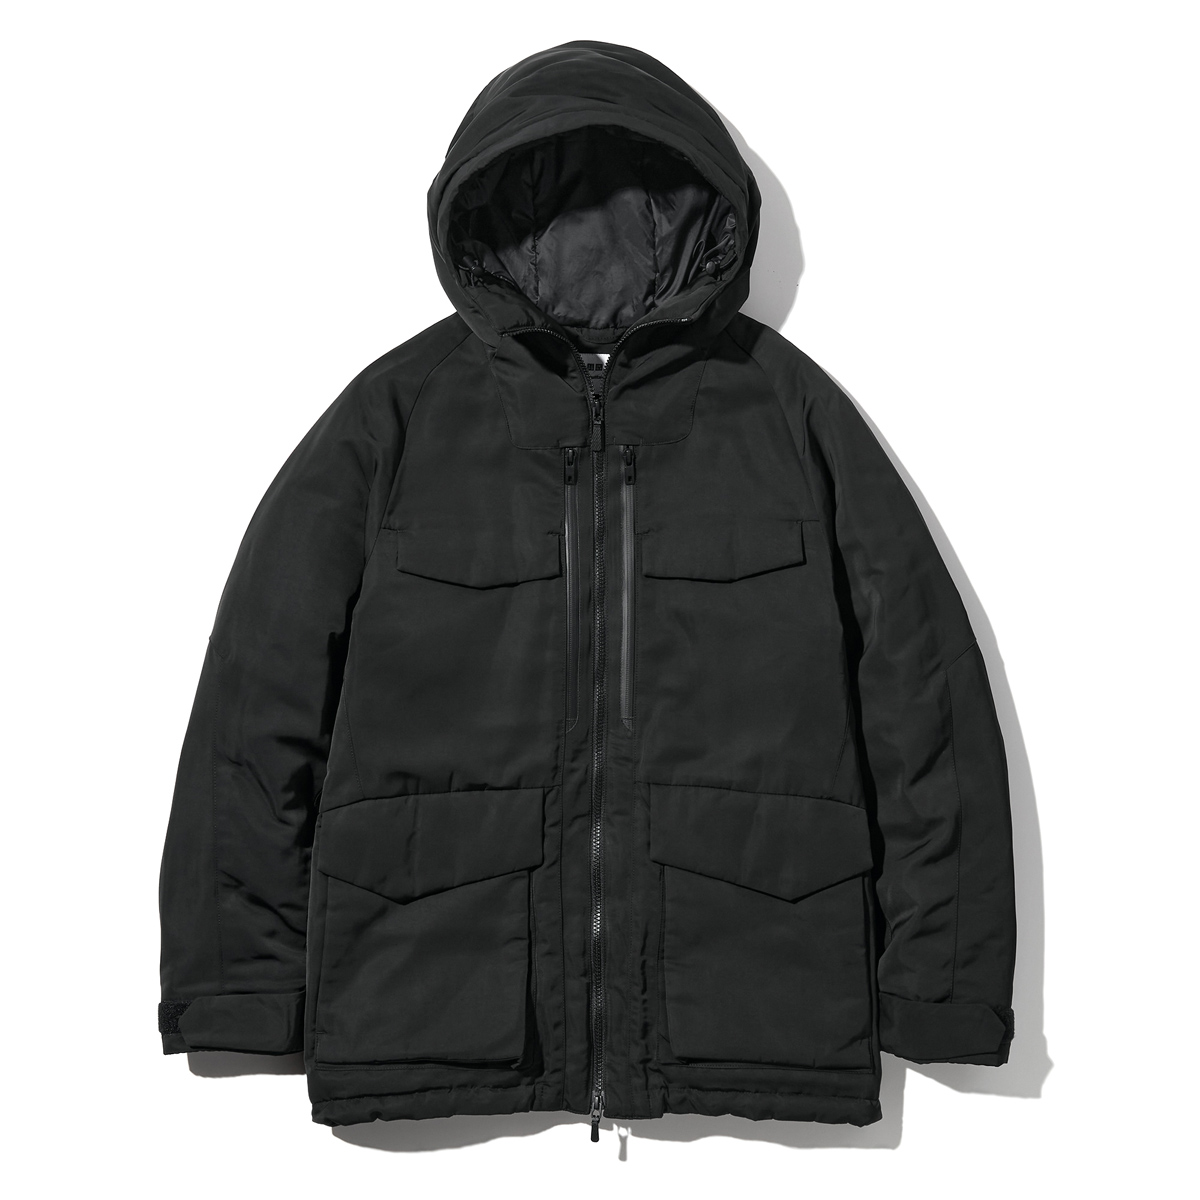 White Mountaineering x UNIQLO Fall/Winter 2021 Collection